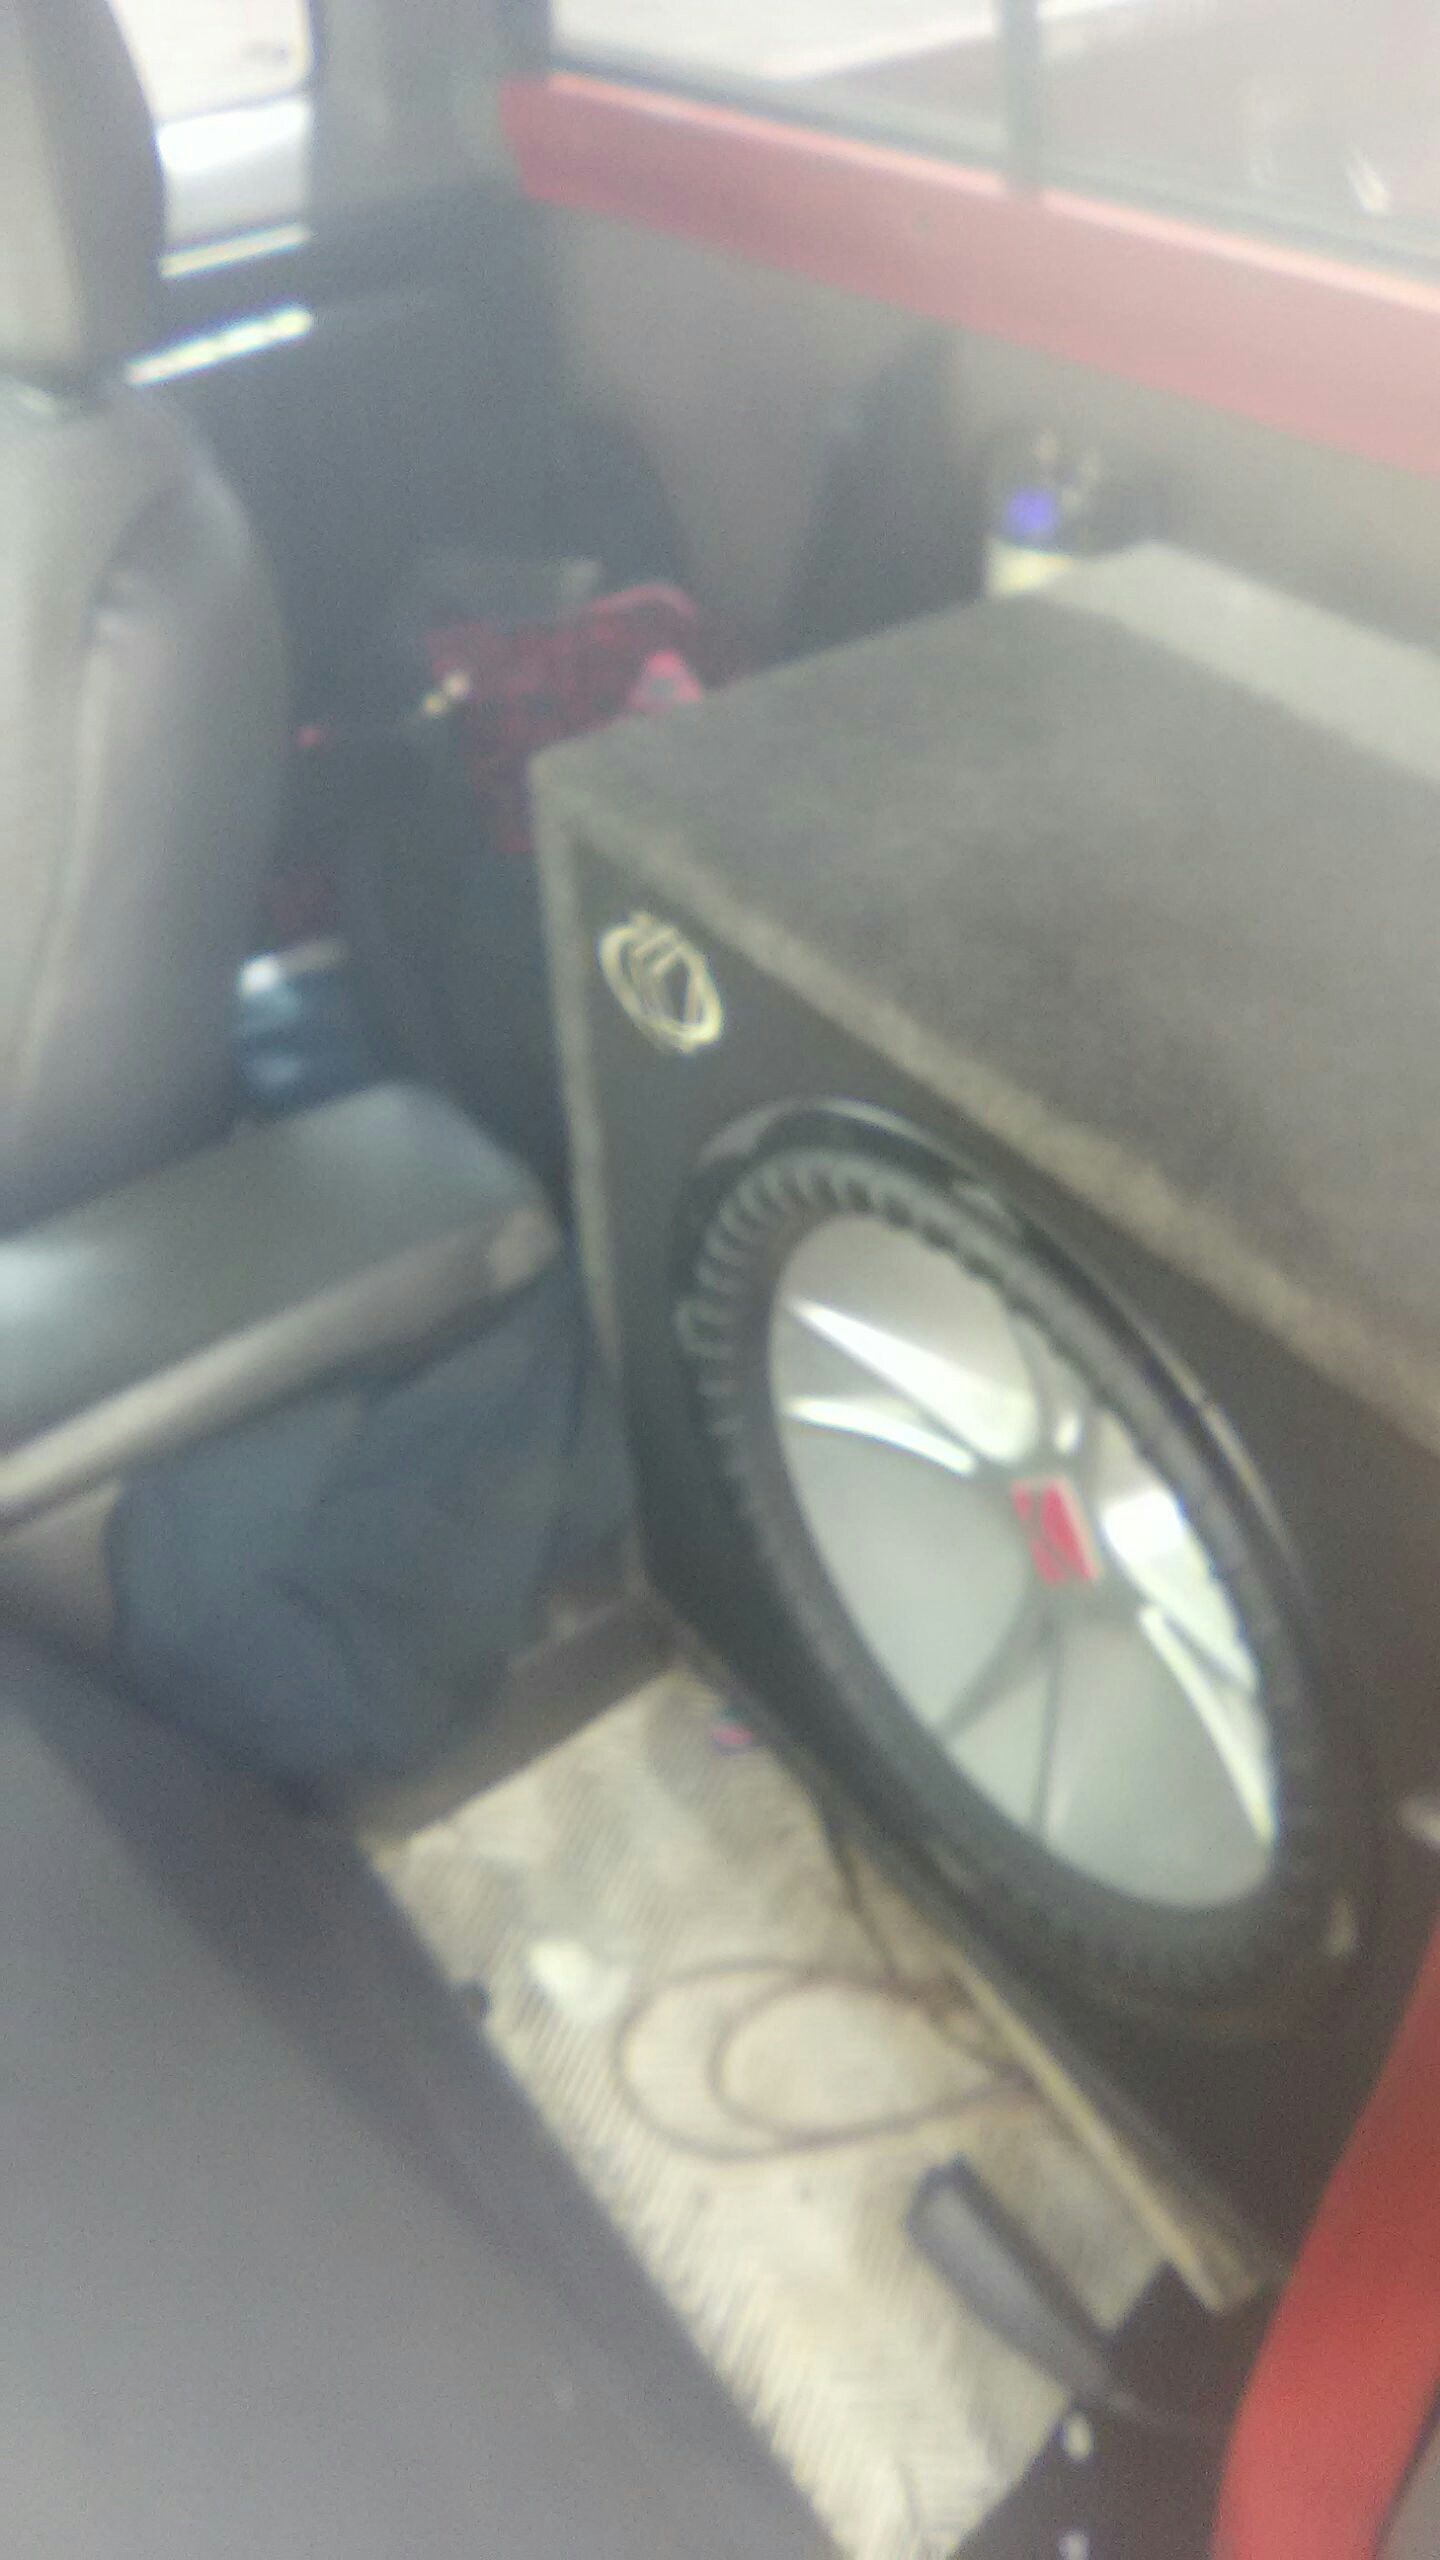 Pro audio shop need tire alignment or sound system let me know